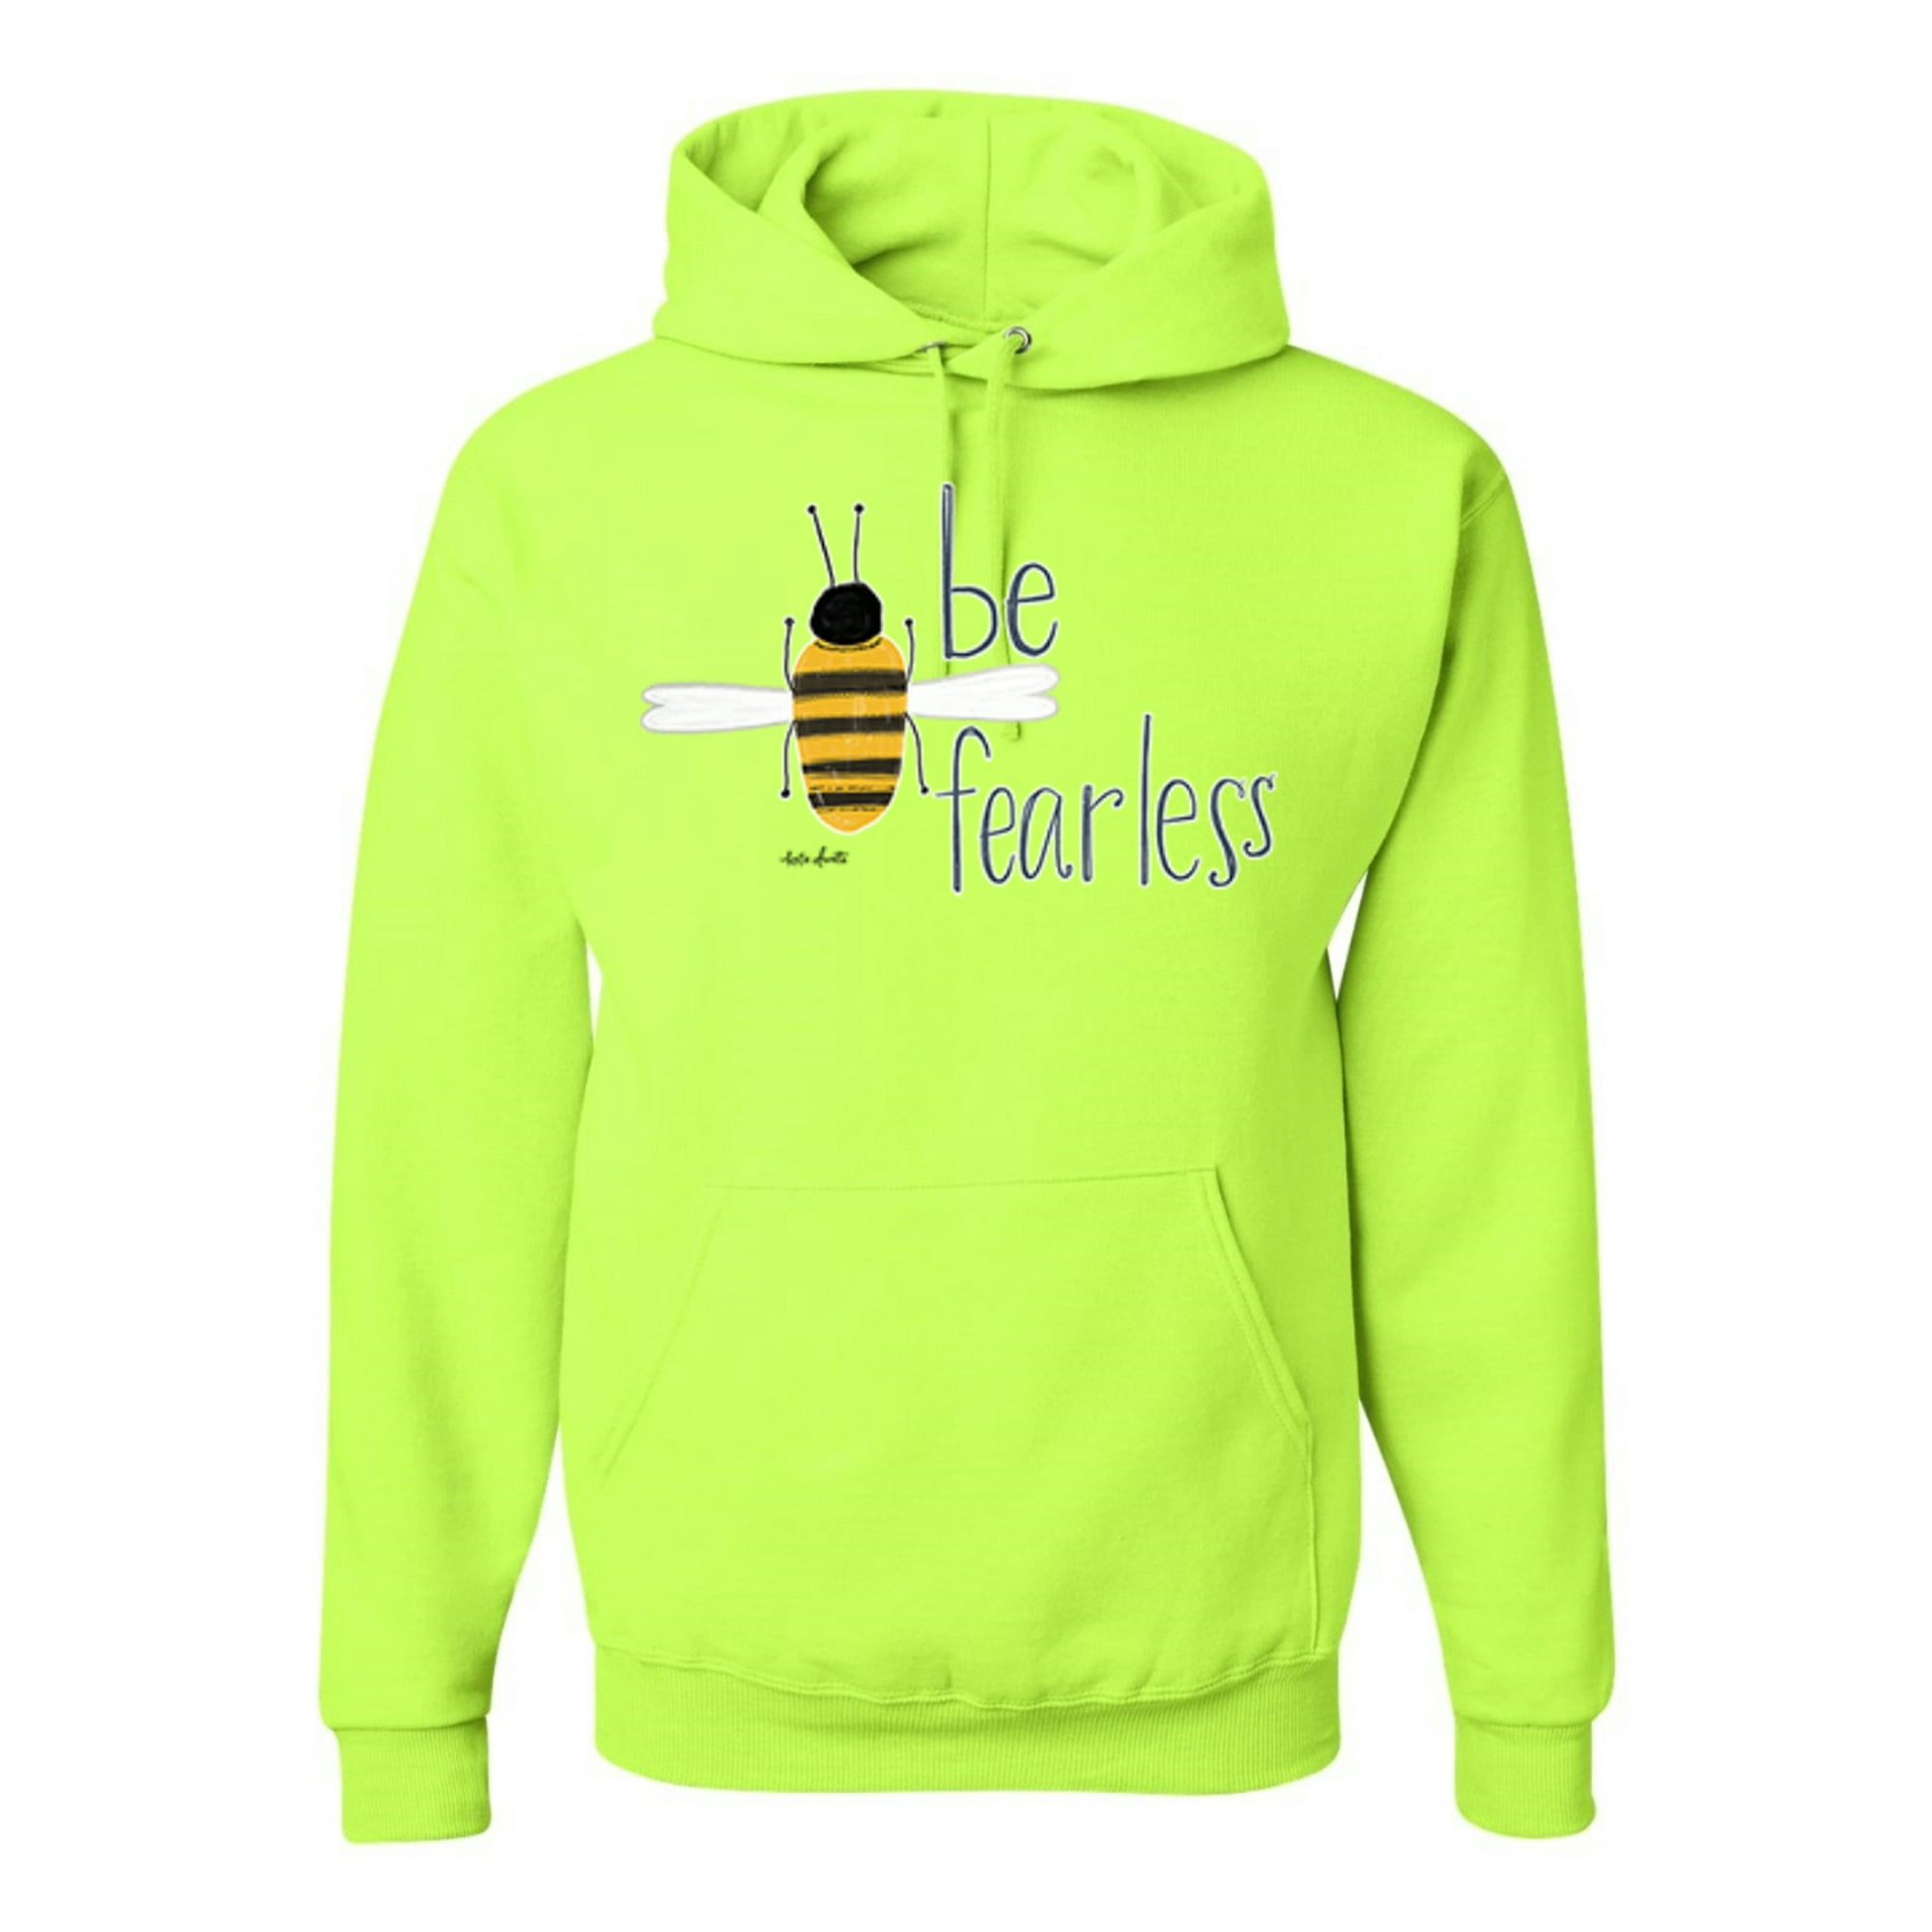 Wild Bobby, Be Fearless Buzzing Bee Pop Culture Unisex Graphic Hoodie Sweatshirt, Safety Green, Large, Men's